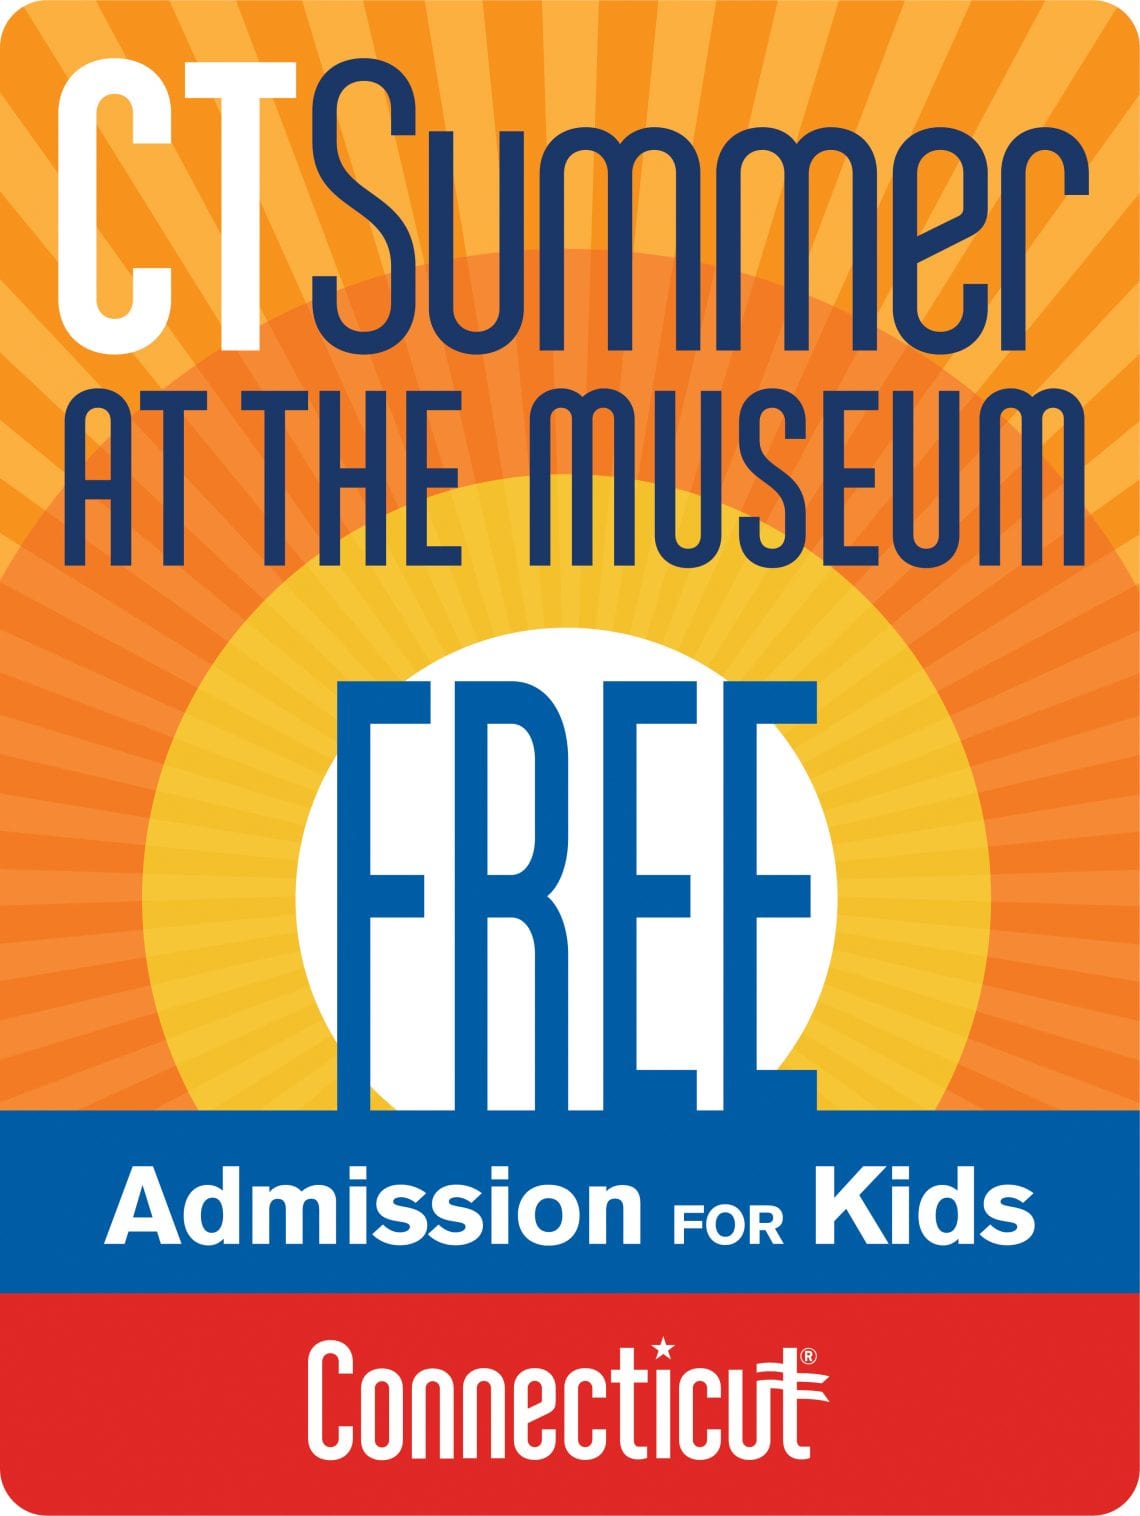 Children's Museum in West Hartford Included in Connecticut's Free